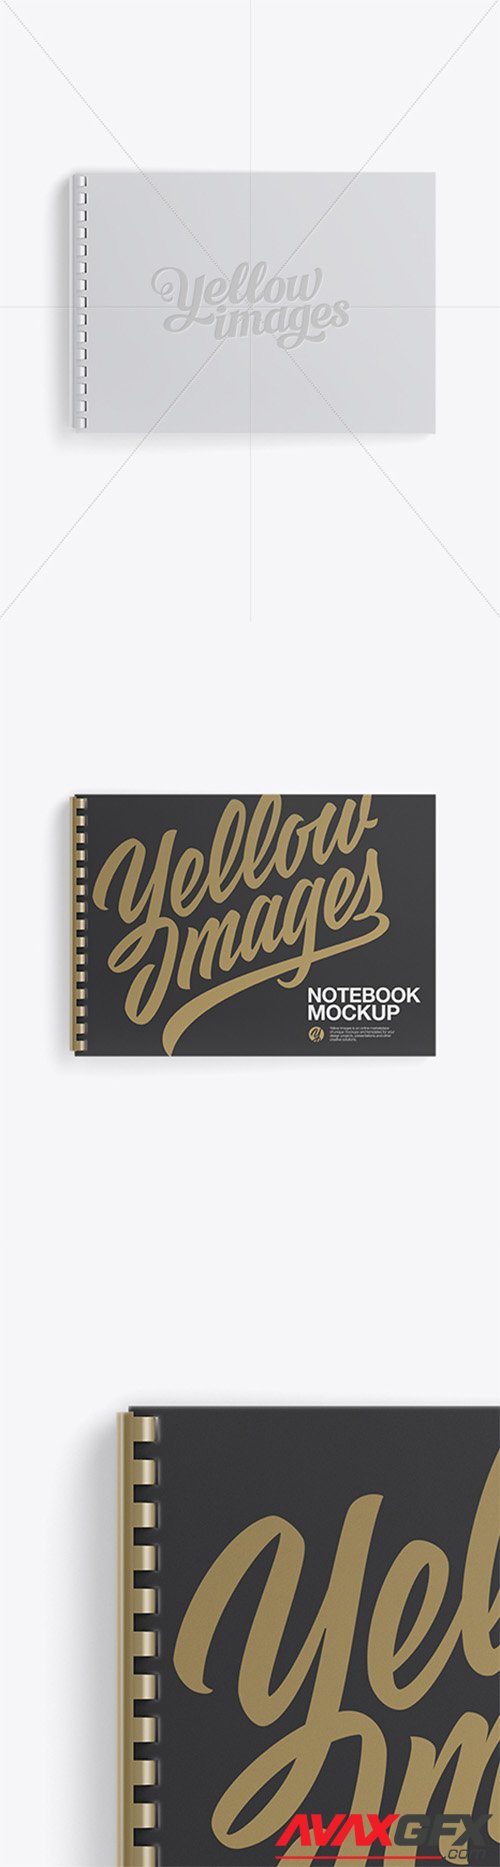 Notebook With Ring Binger Mockup - Top View 19097